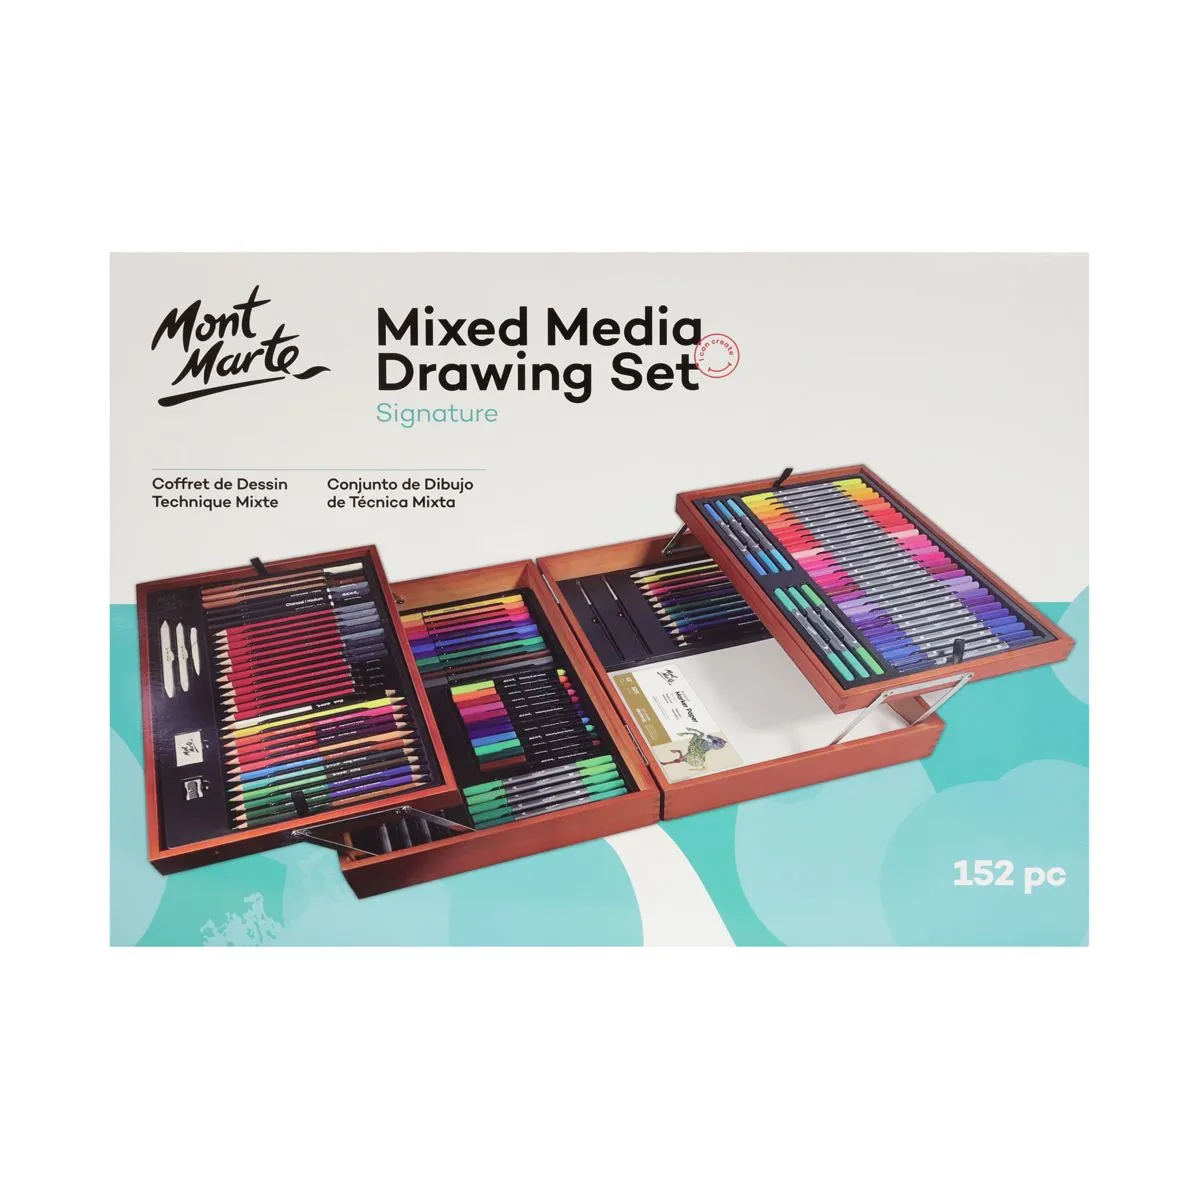 Drawing Accessories, Art Supplies Online Australia - Same Day Shipping